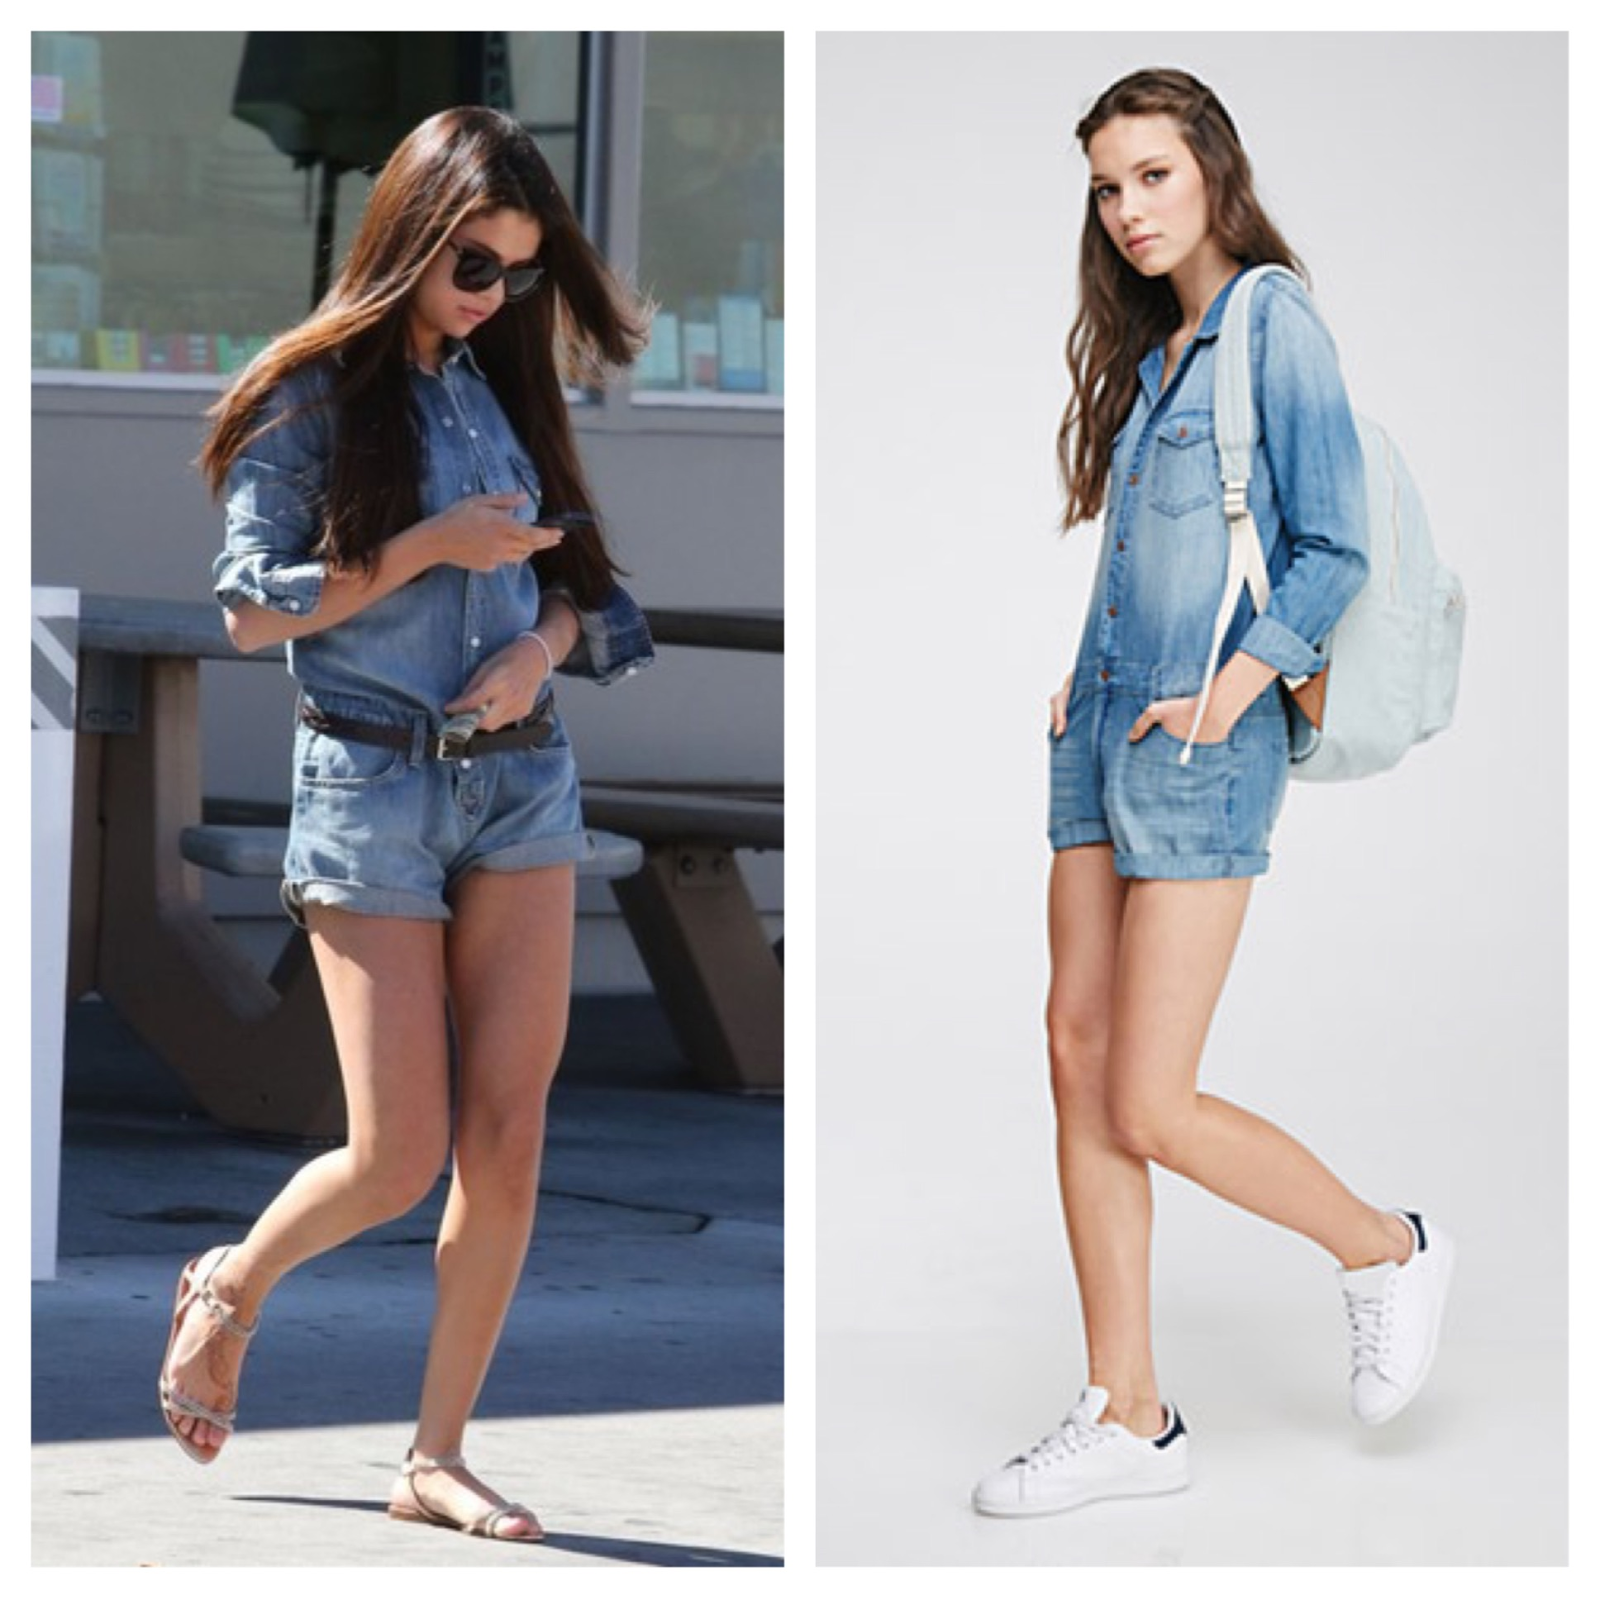 http://api.shopstyle.com/action/apiVisitRetailer?url=http%3A%2F%2Fwww1.bloomingdales.com%2Fshop%2Fproduct%2Fjoes-jeans-romper-shirttail-in-sandie%3FID%3D698770&pid=uid6496-22988364-91